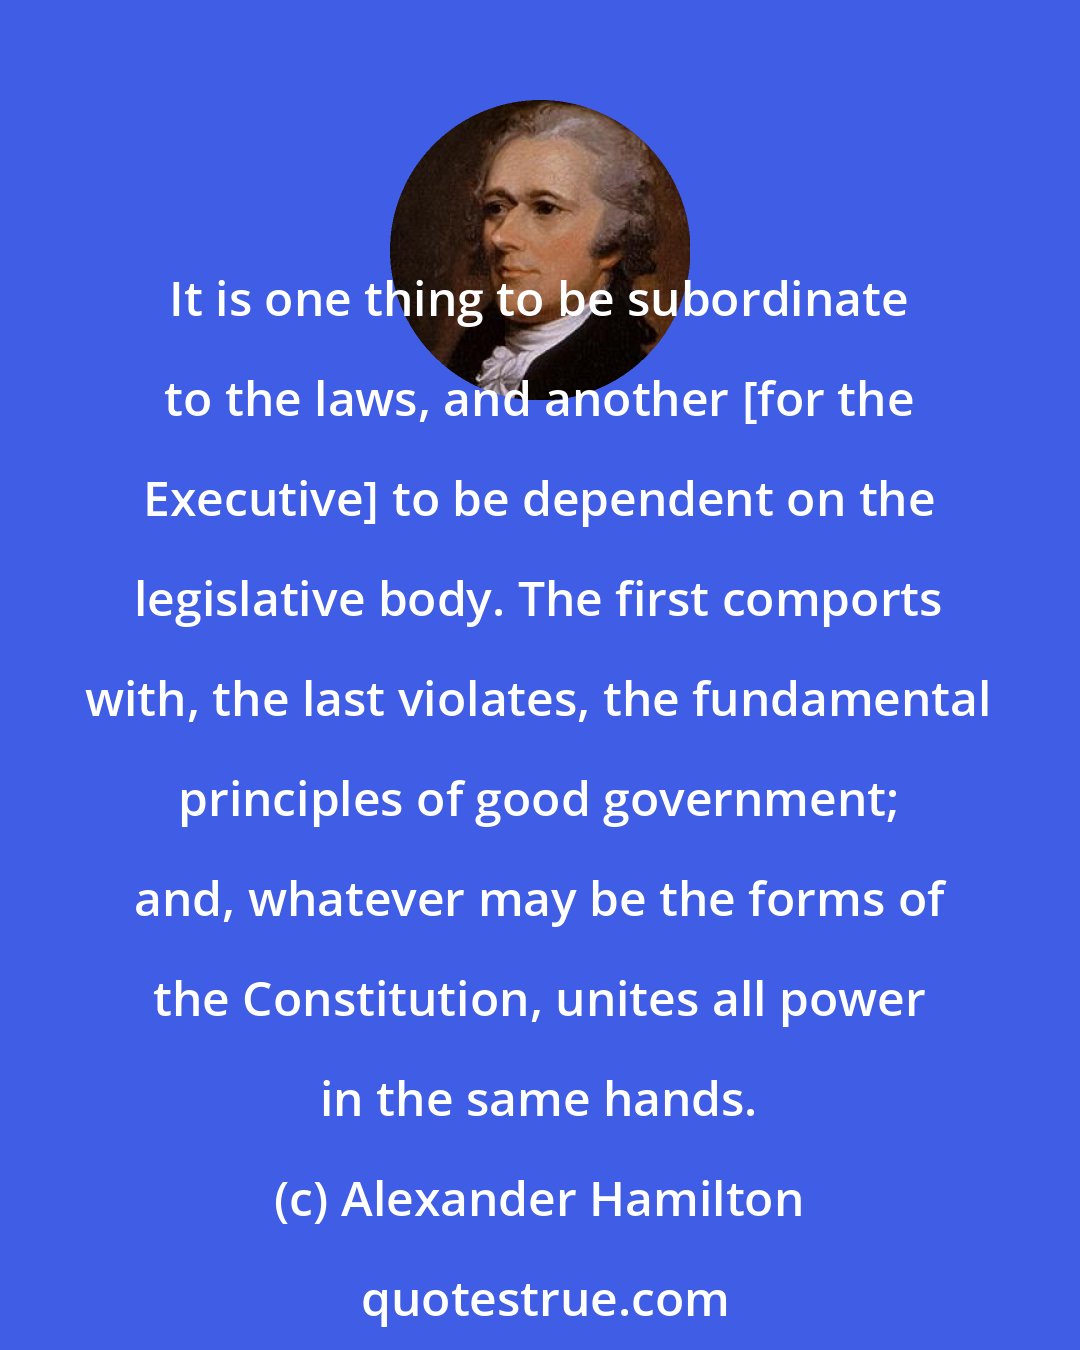 Alexander Hamilton: It is one thing to be subordinate to the laws, and another [for the Executive] to be dependent on the legislative body. The first comports with, the last violates, the fundamental principles of good government; and, whatever may be the forms of the Constitution, unites all power in the same hands.